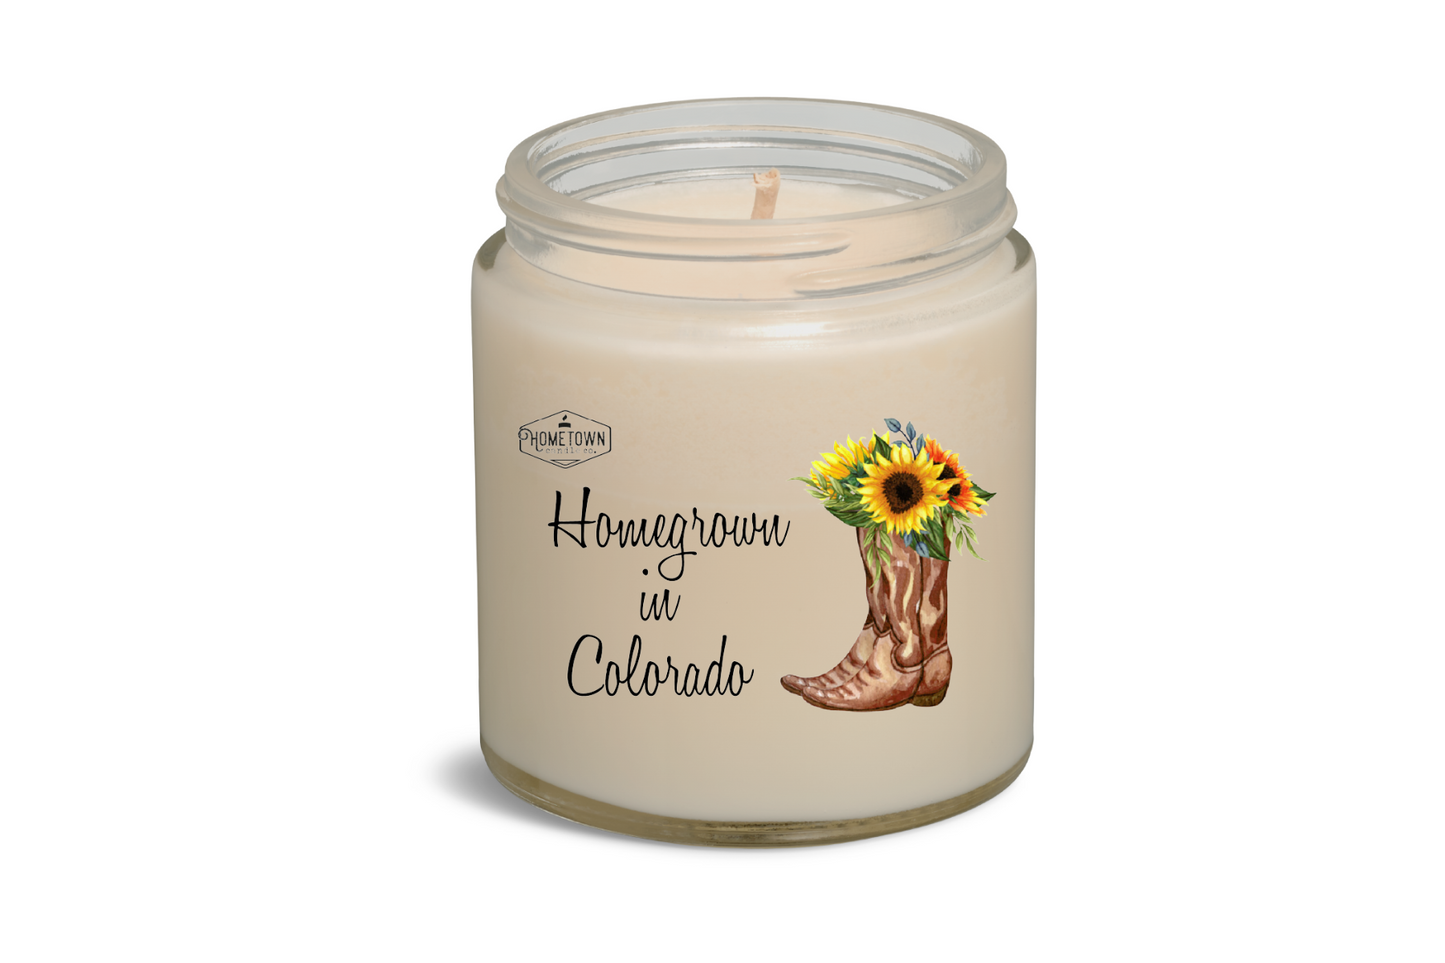 Homegrown Western Style in [Your Place] Candle (6 oz)